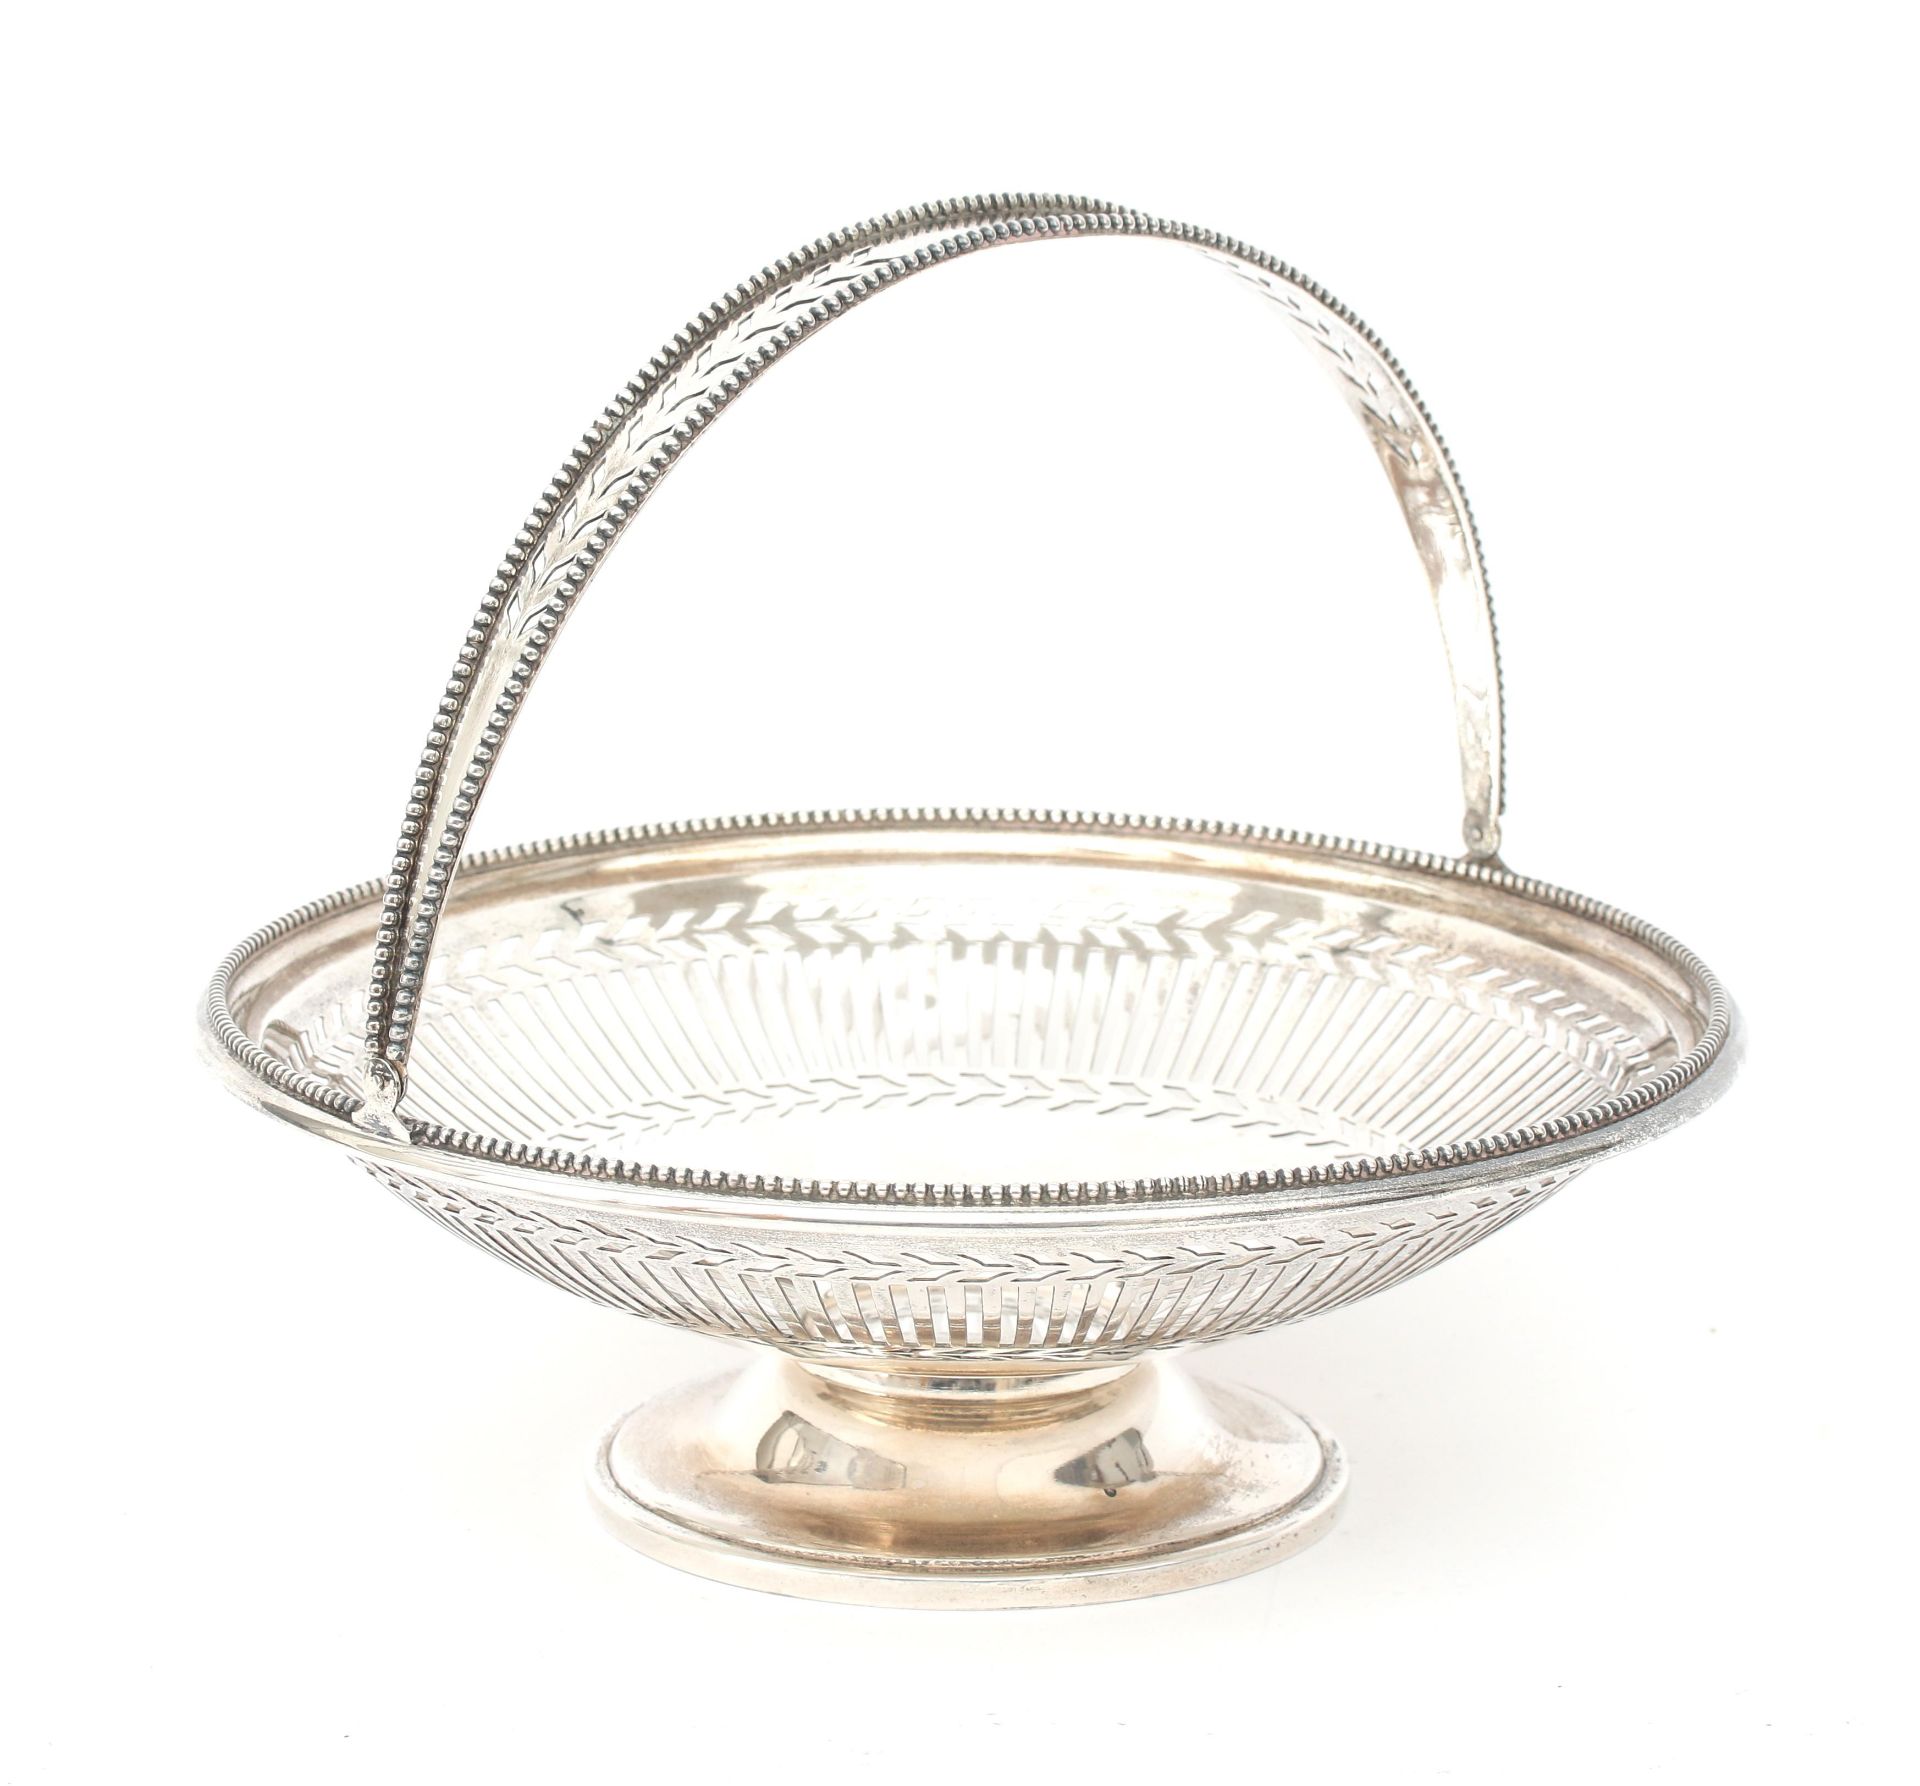 A round pierced 835 silver swing handle basket with beaded borders on base, maker's mark: J.M. van